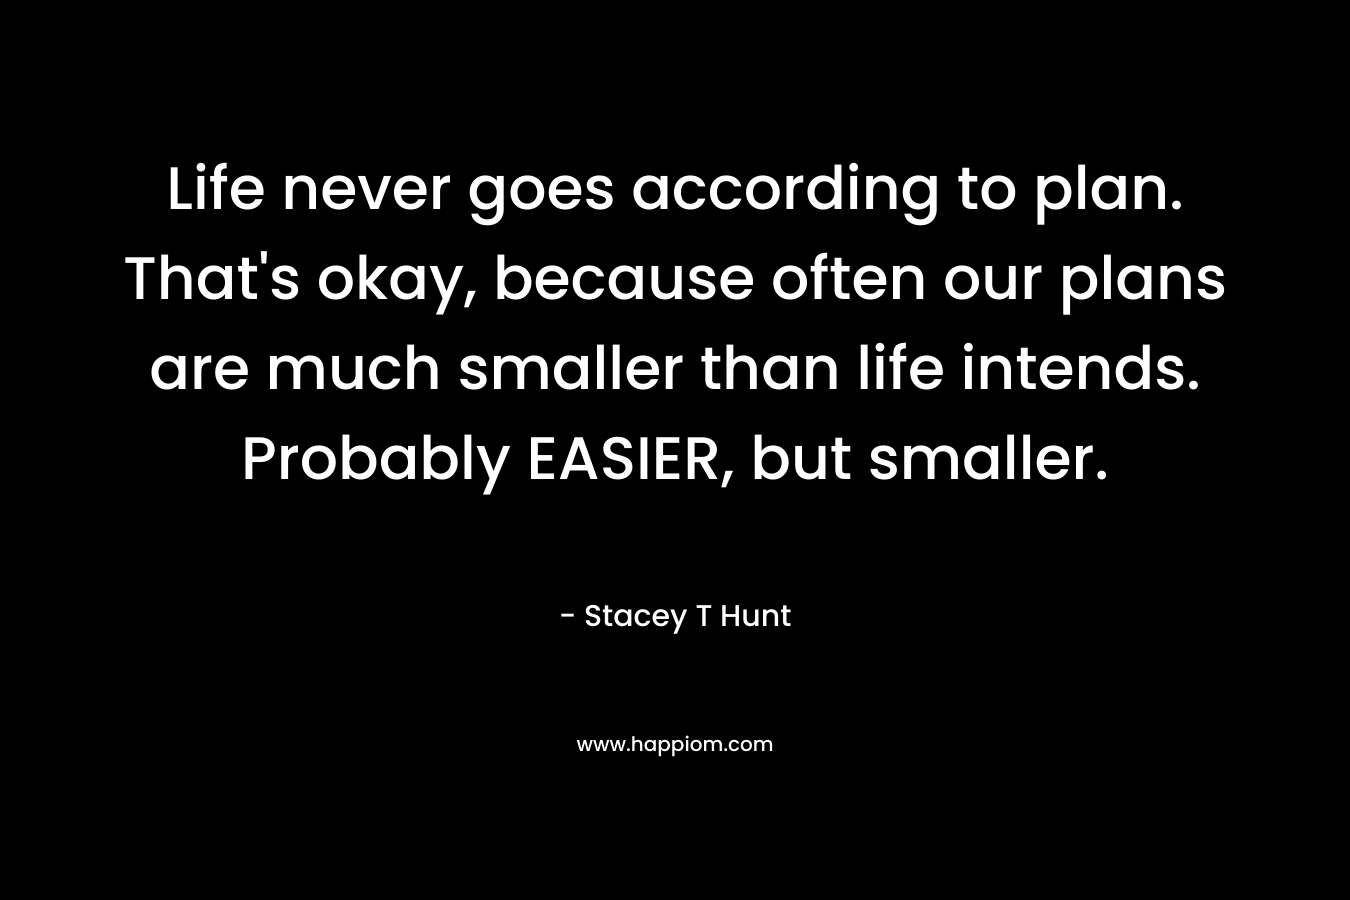 Life never goes according to plan. That’s okay, because often our plans are much smaller than life intends. Probably EASIER, but smaller. – Stacey T Hunt